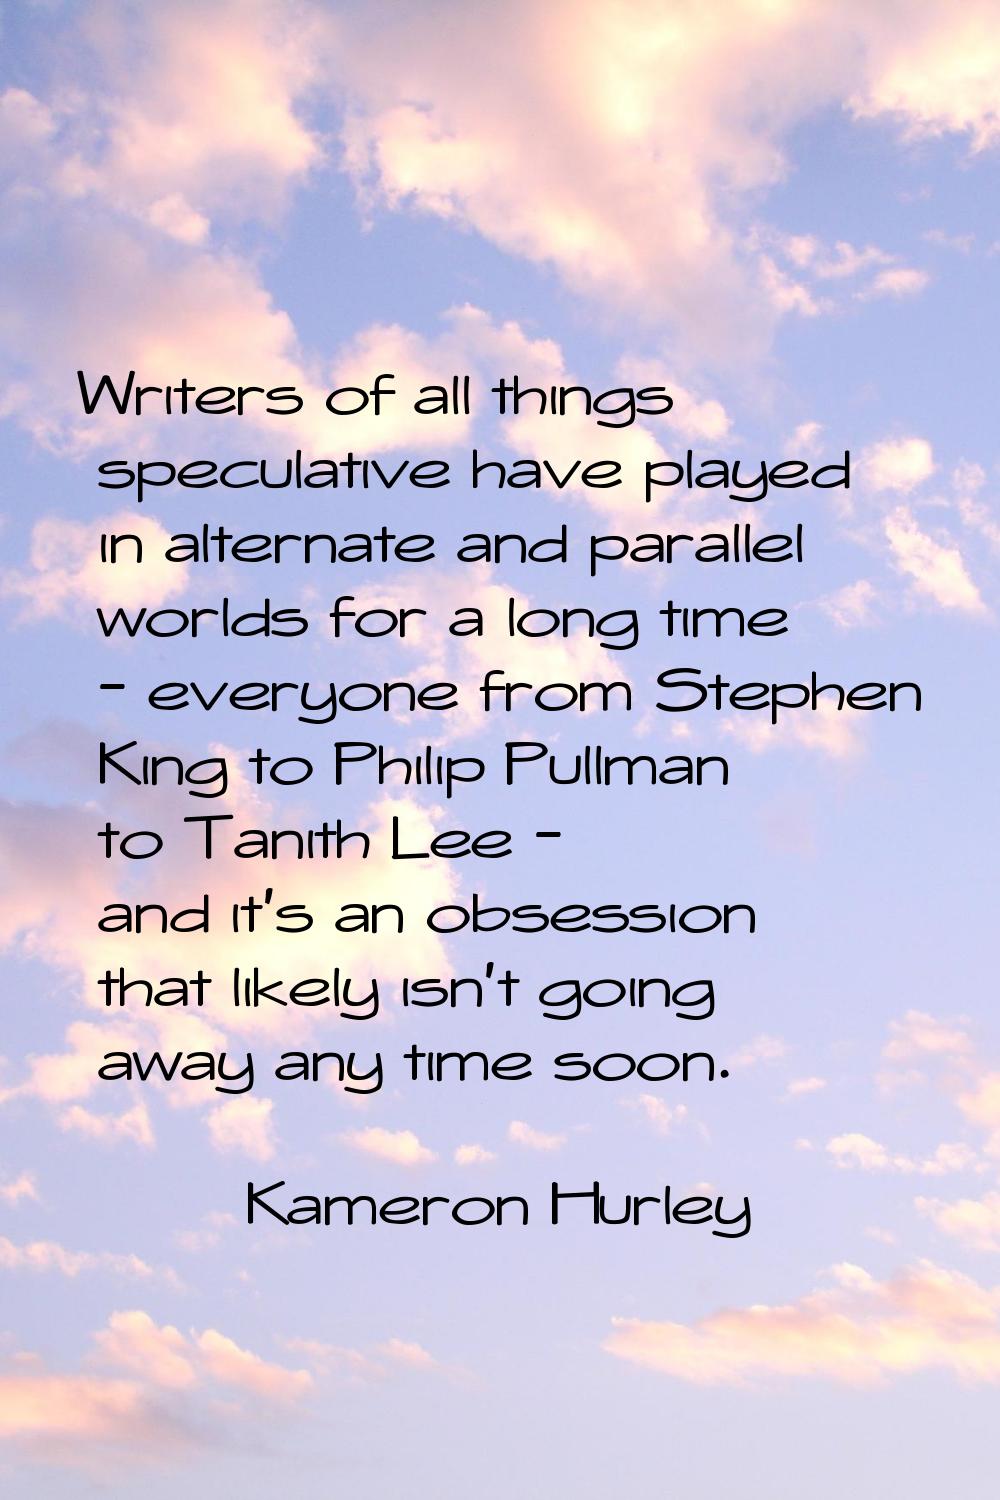 Writers of all things speculative have played in alternate and parallel worlds for a long time - ev